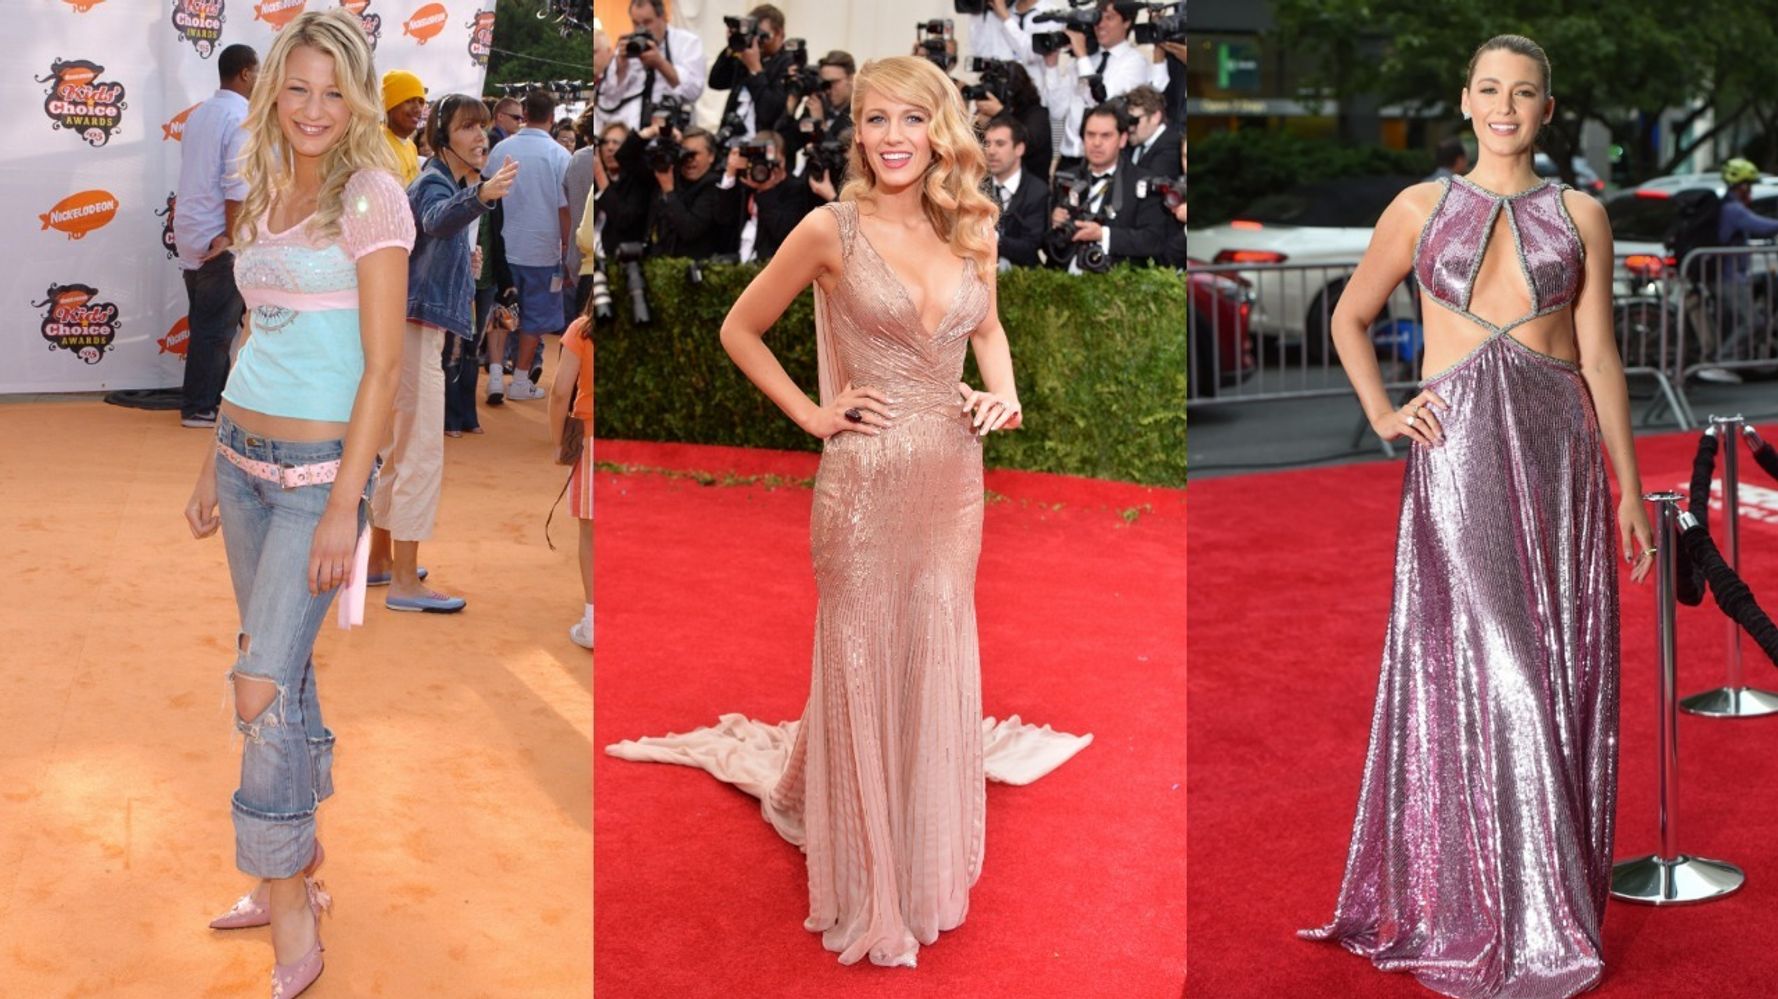 Photos Of Blake Lively's Style Evolution, From Teen Star To Vogue Cover Girl